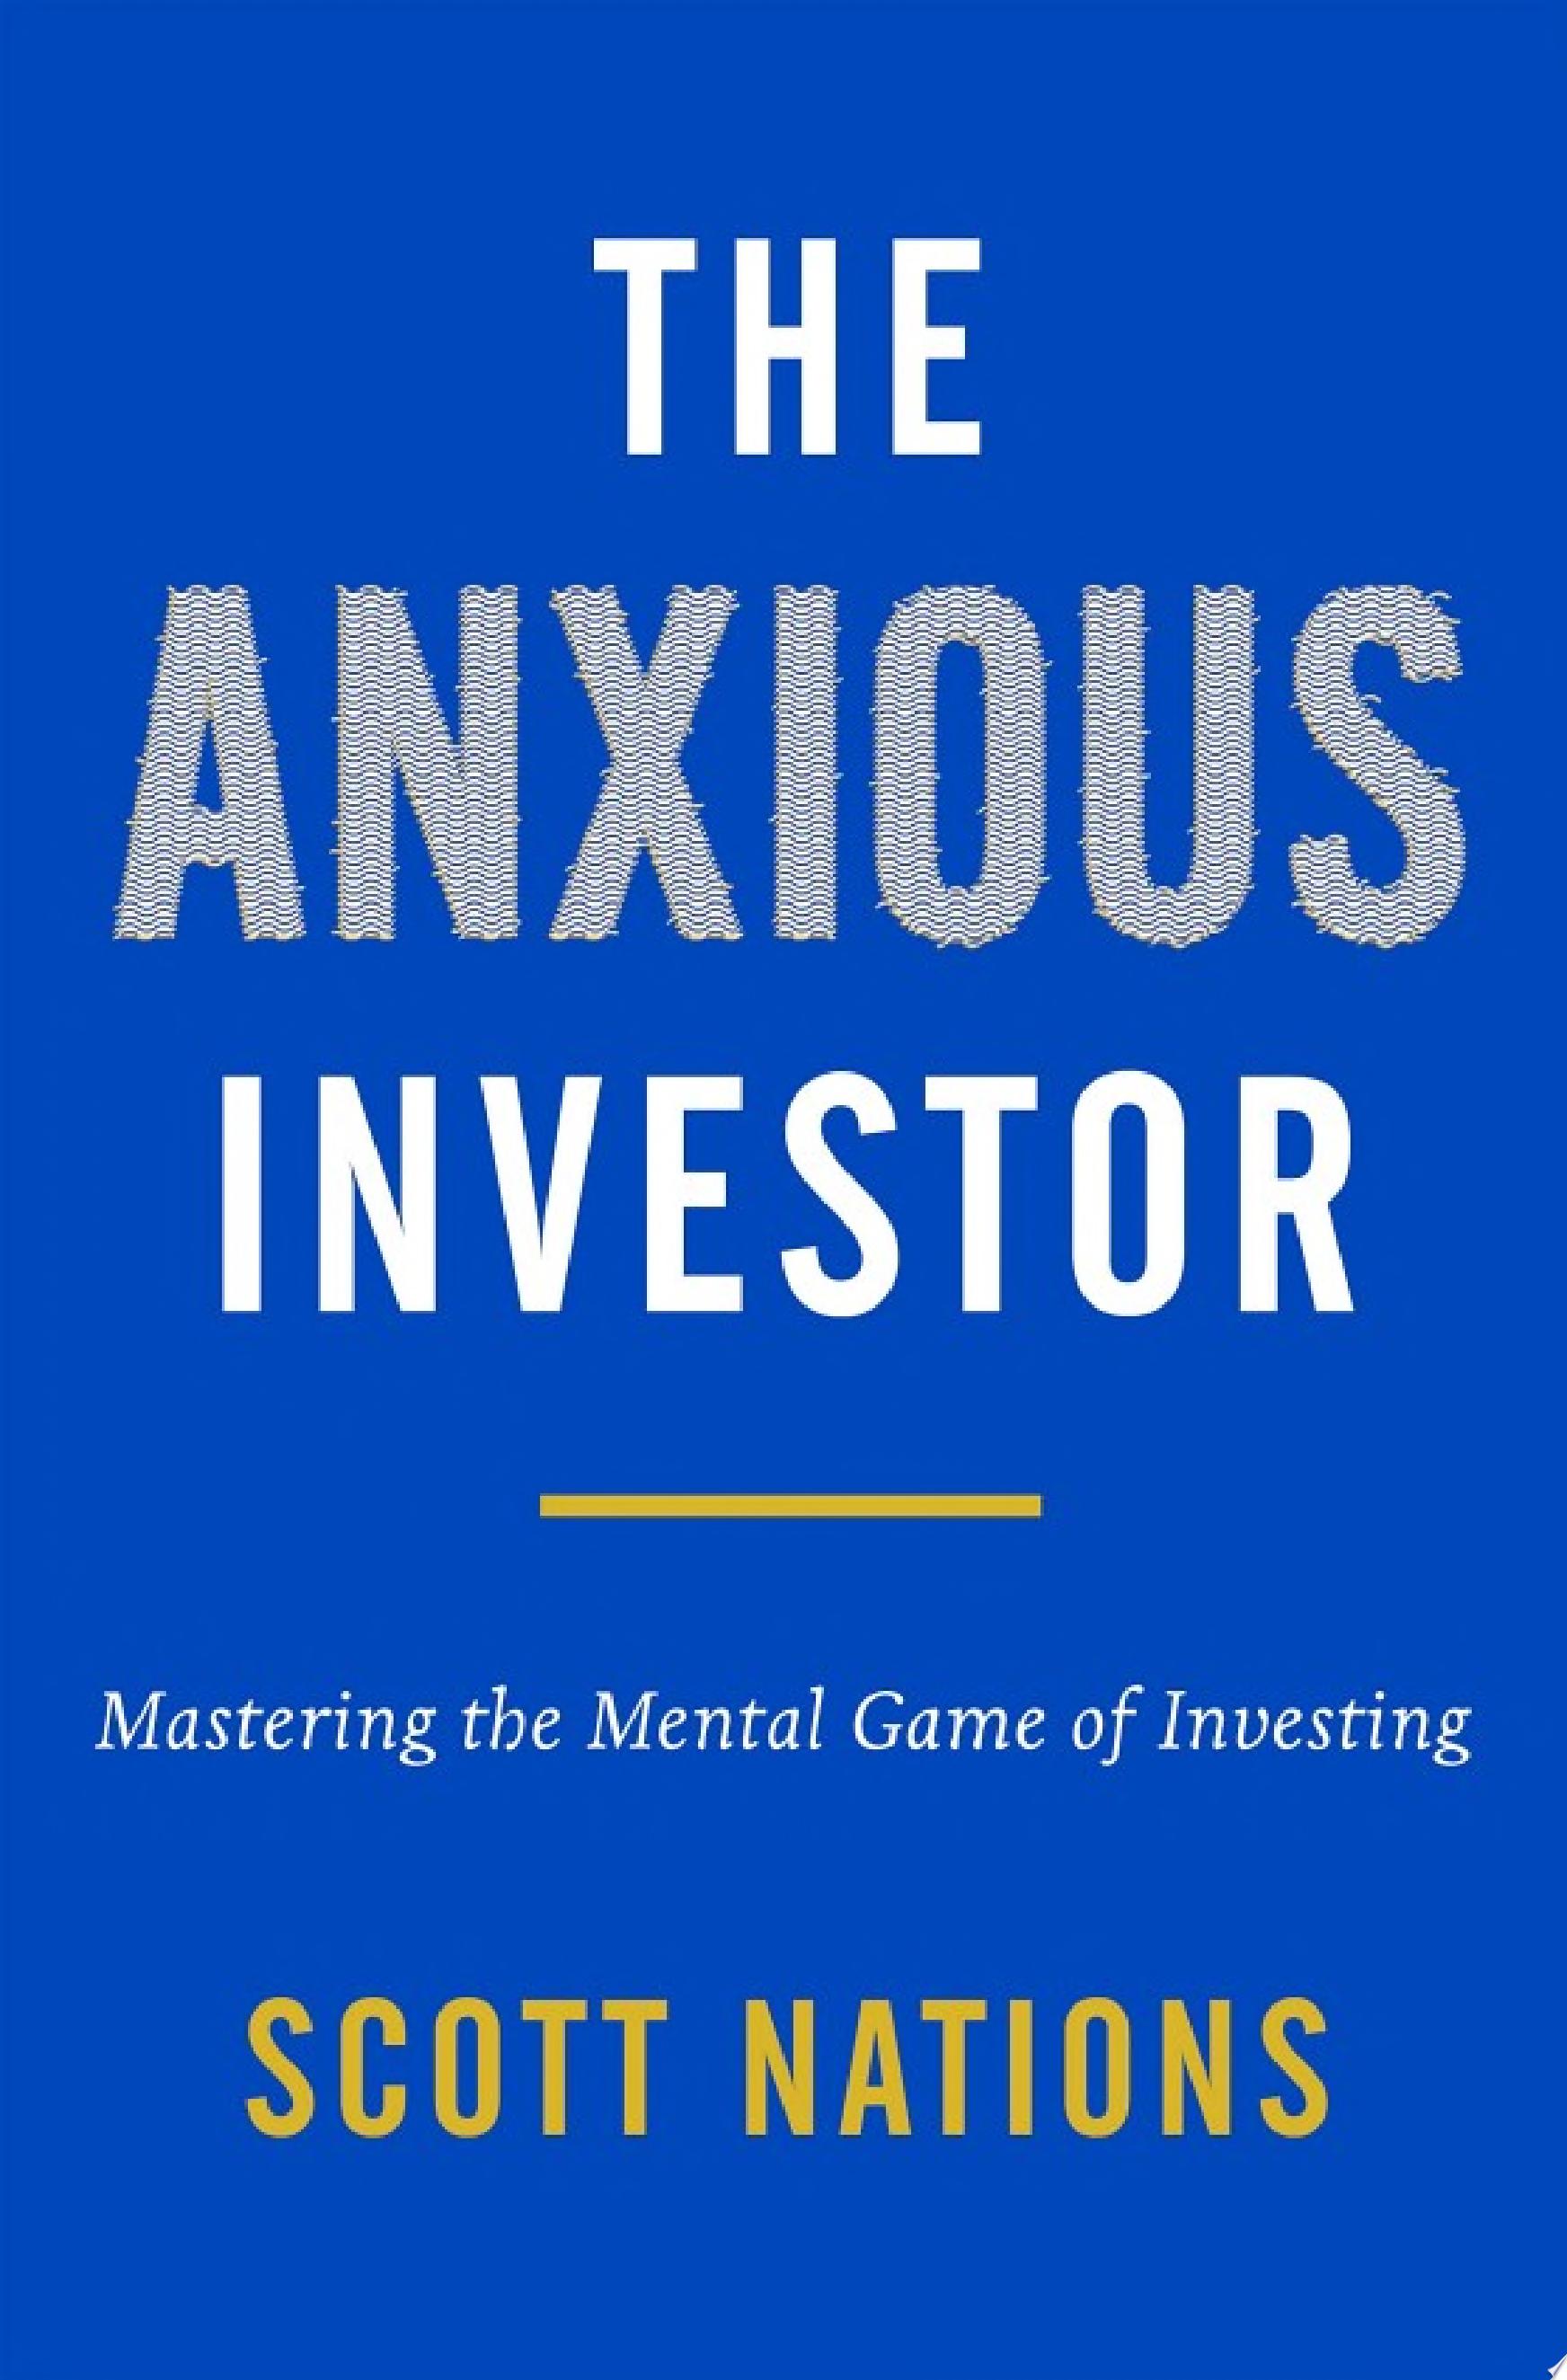 Image for "The Anxious Investor"